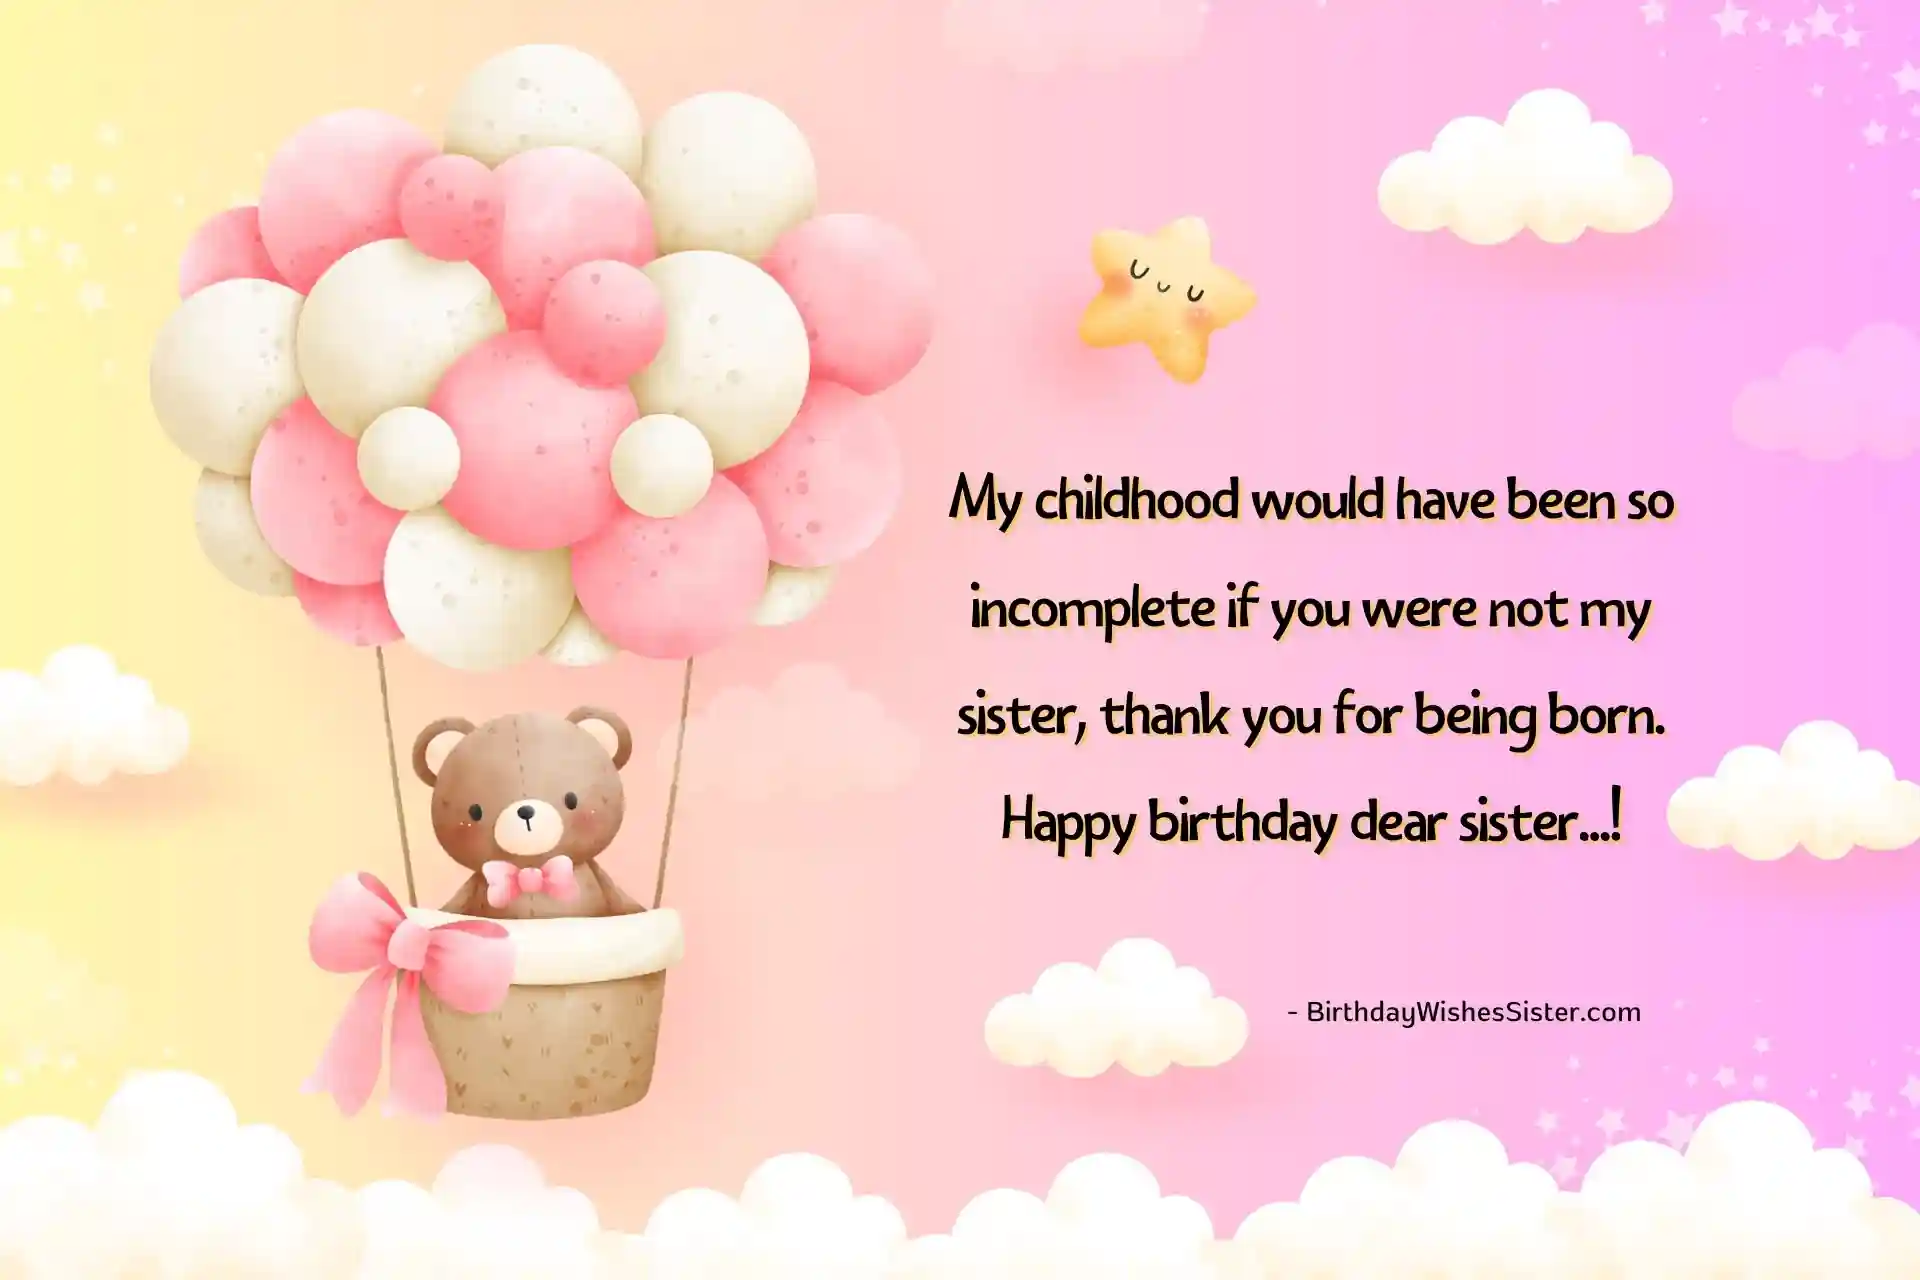 Sister Birthday Wishes Caption, Birthday Caption For Sister